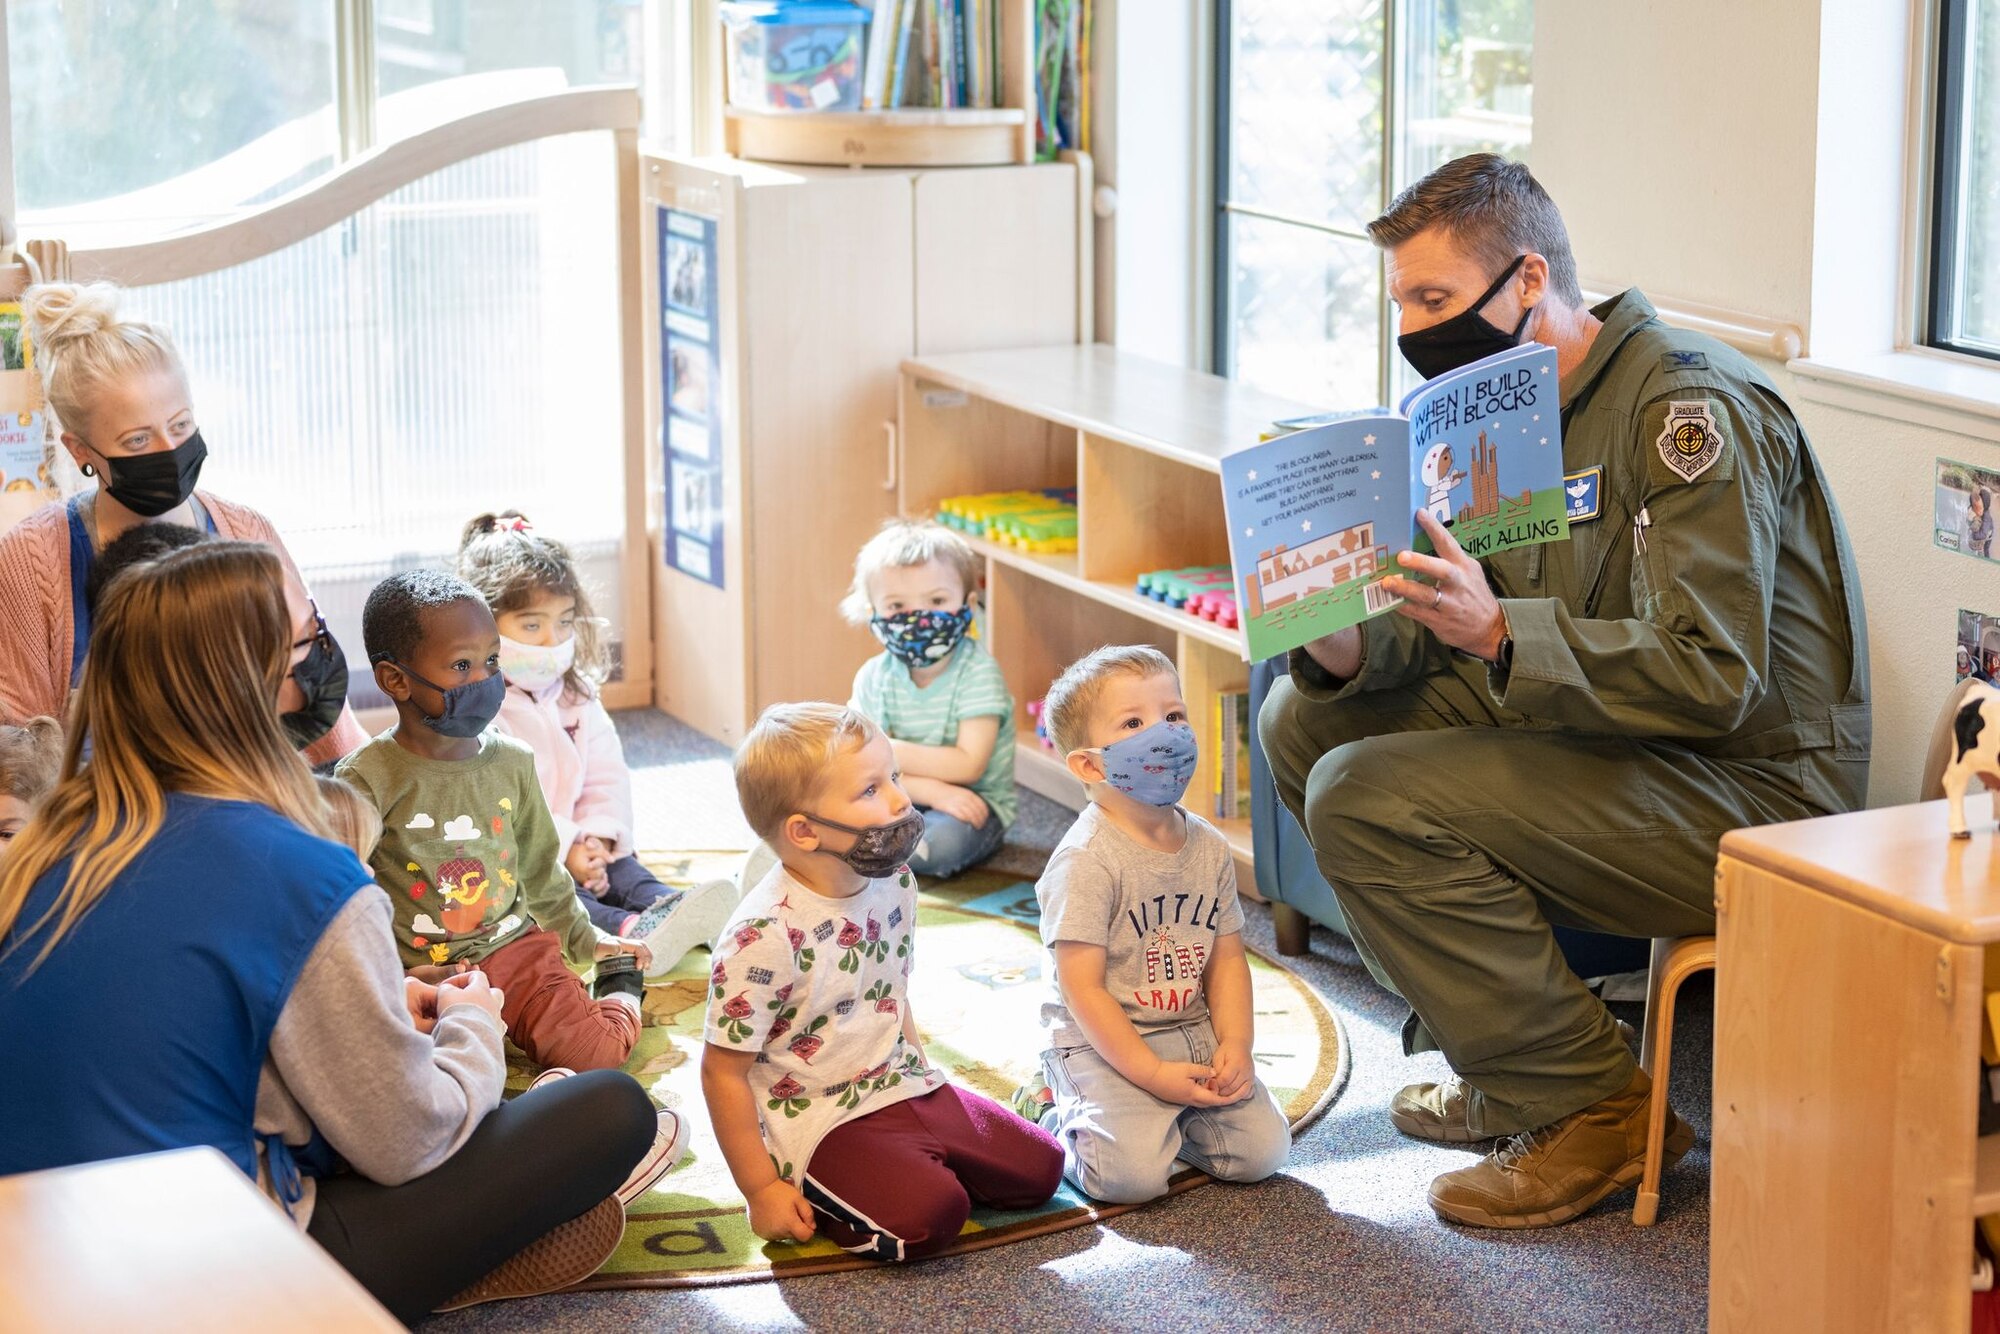 A man in a military uniform reads a children's story to a gaggle of children in a brightly-lit classroom